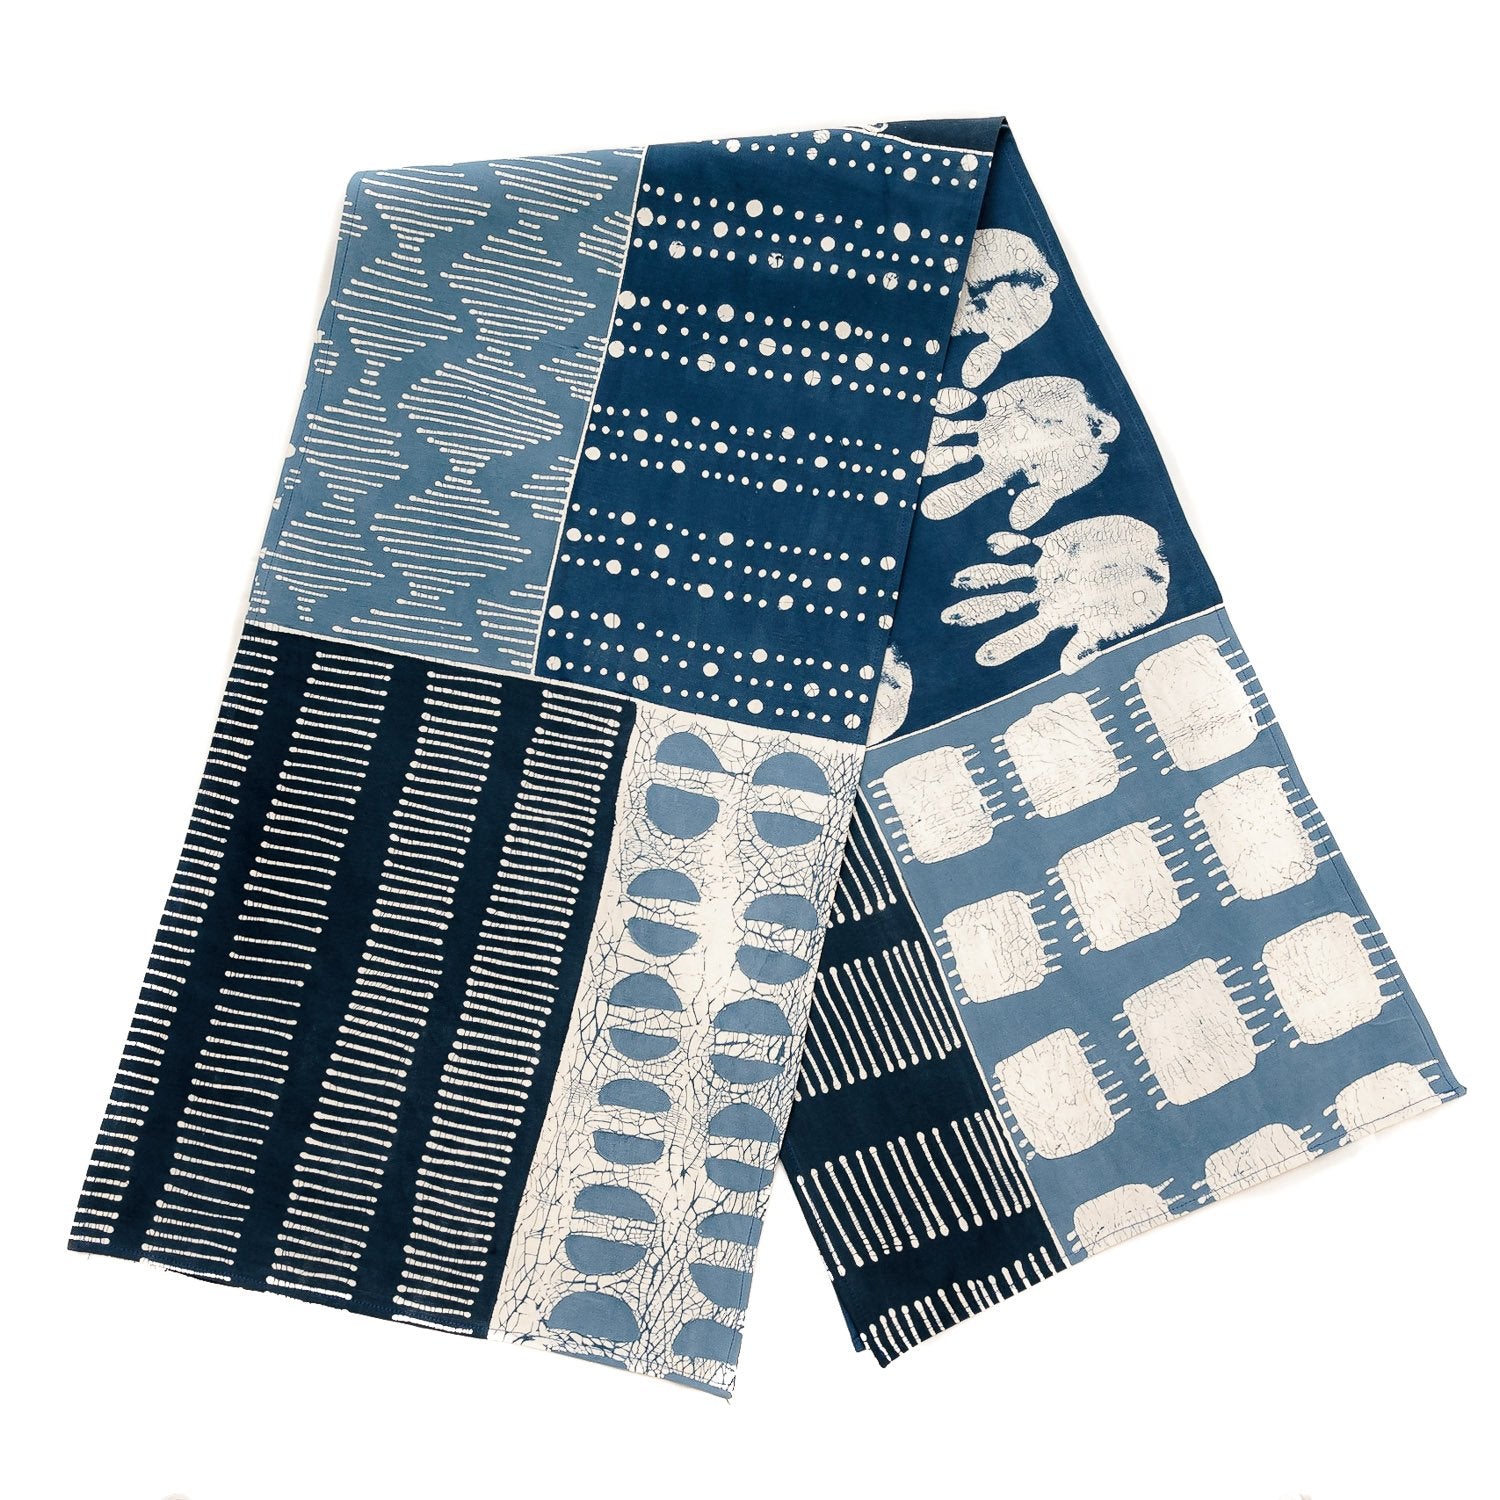 Table Runner Indigo Patchwork from Tribal Textiles